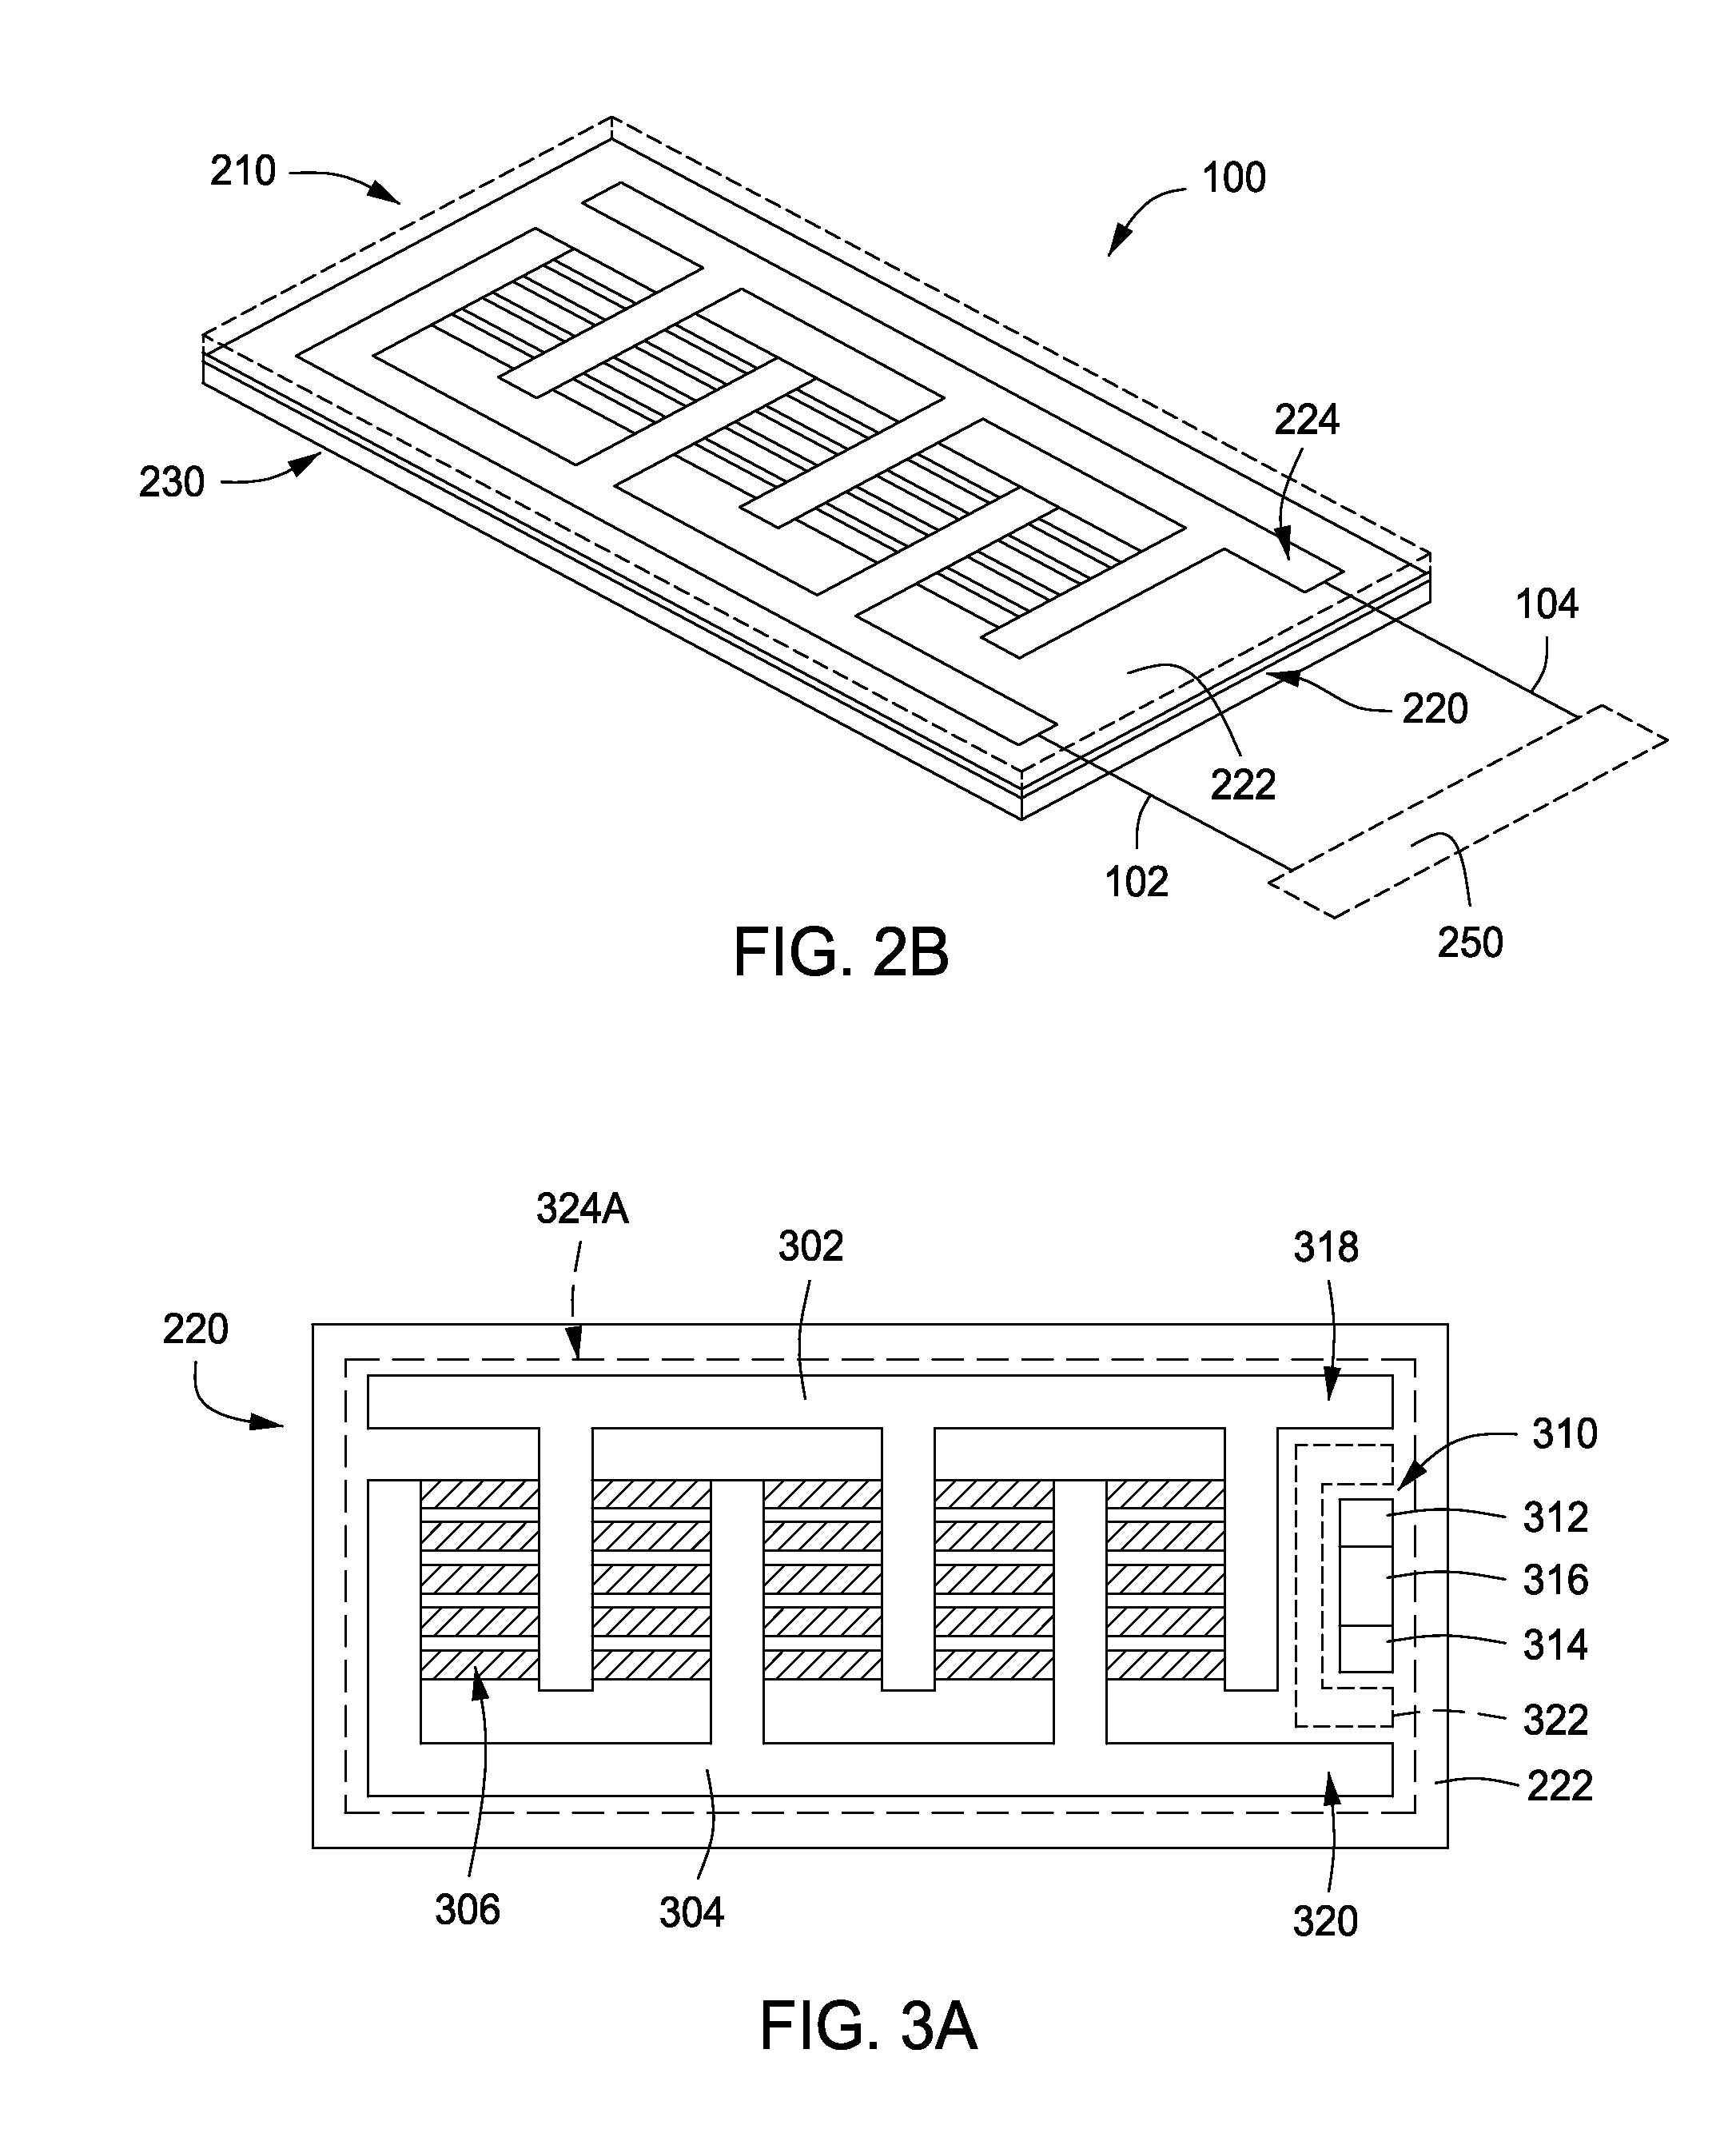 Methods and apparatus for active patient warming